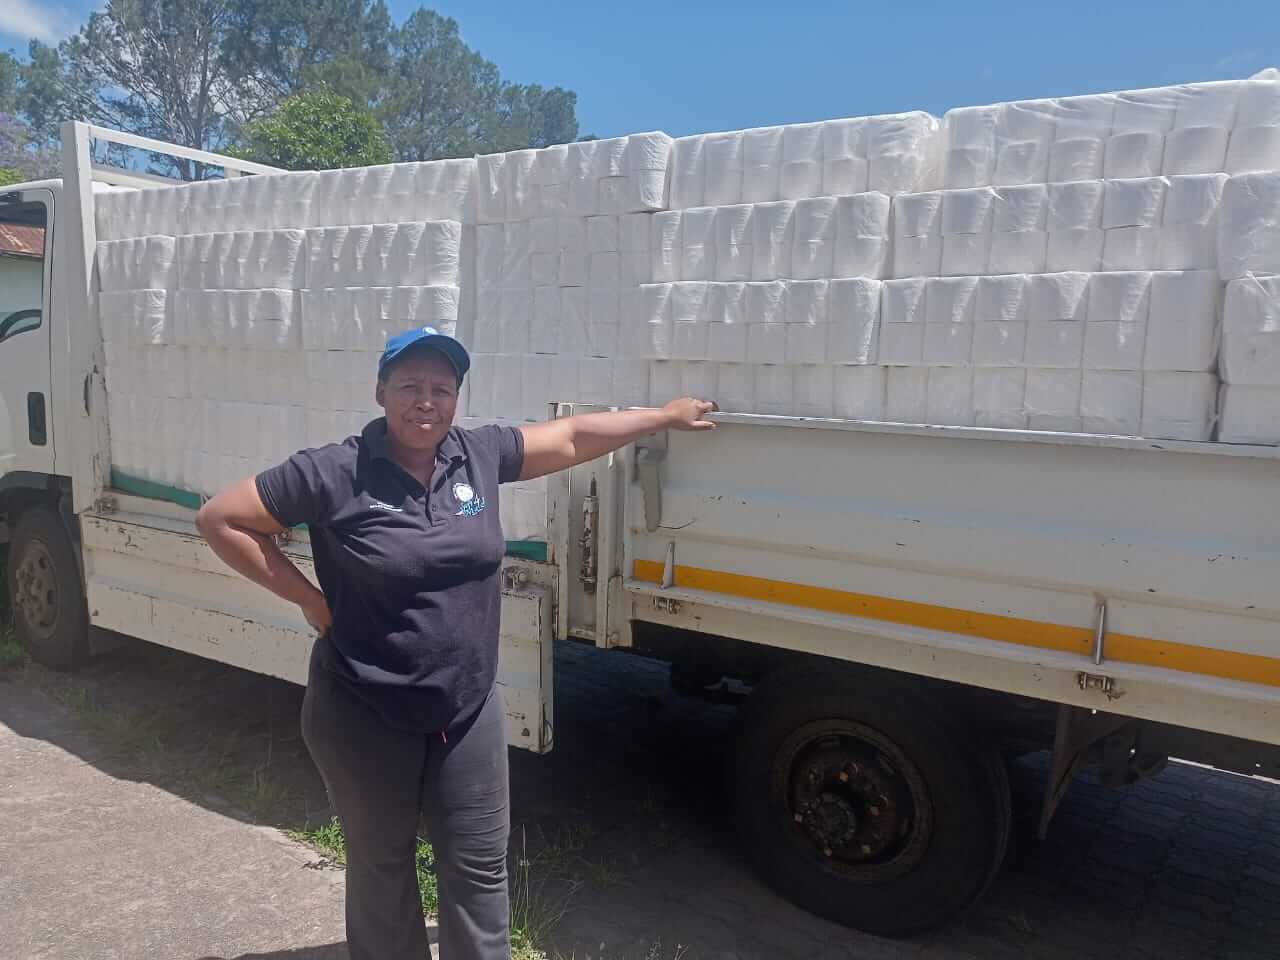 Soft4Matat: Pioneering Growth in South Africa's Toilet Paper Manufacturing Industry